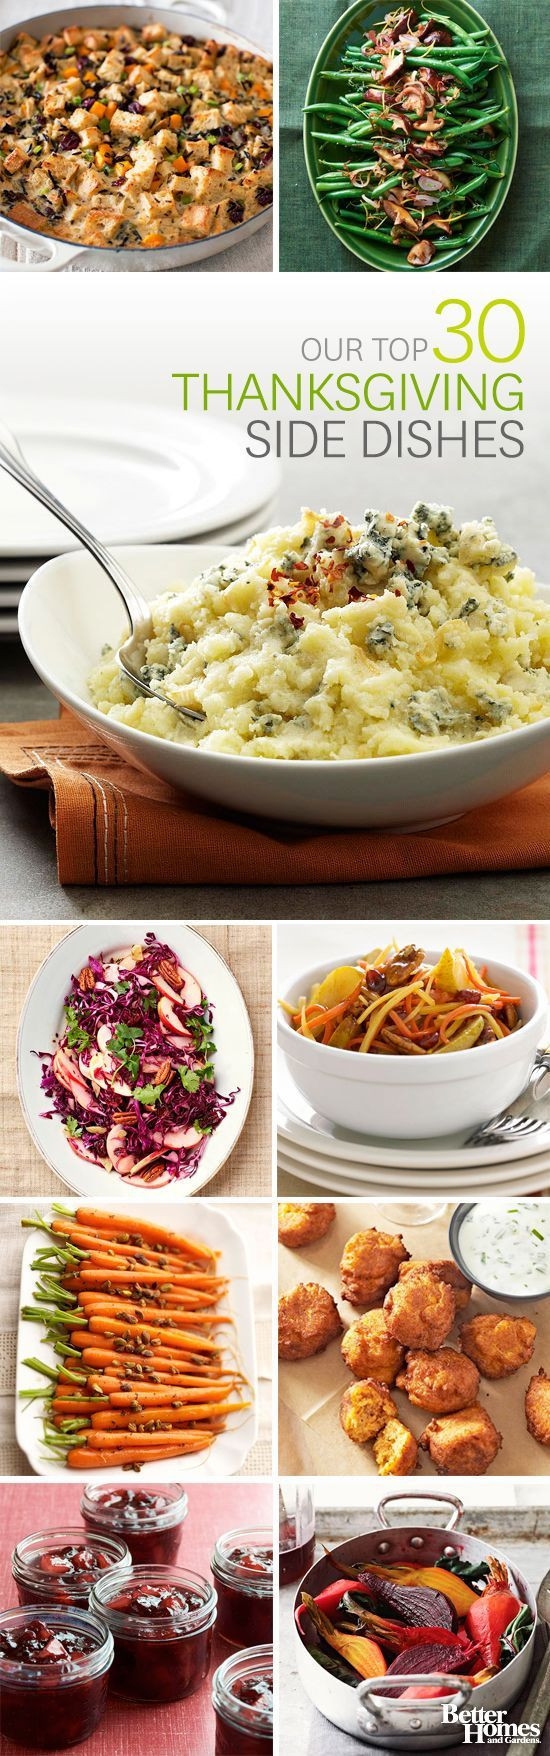 Make Ahead Sides For Thanksgiving
 Make Ahead Holiday Side Dishes